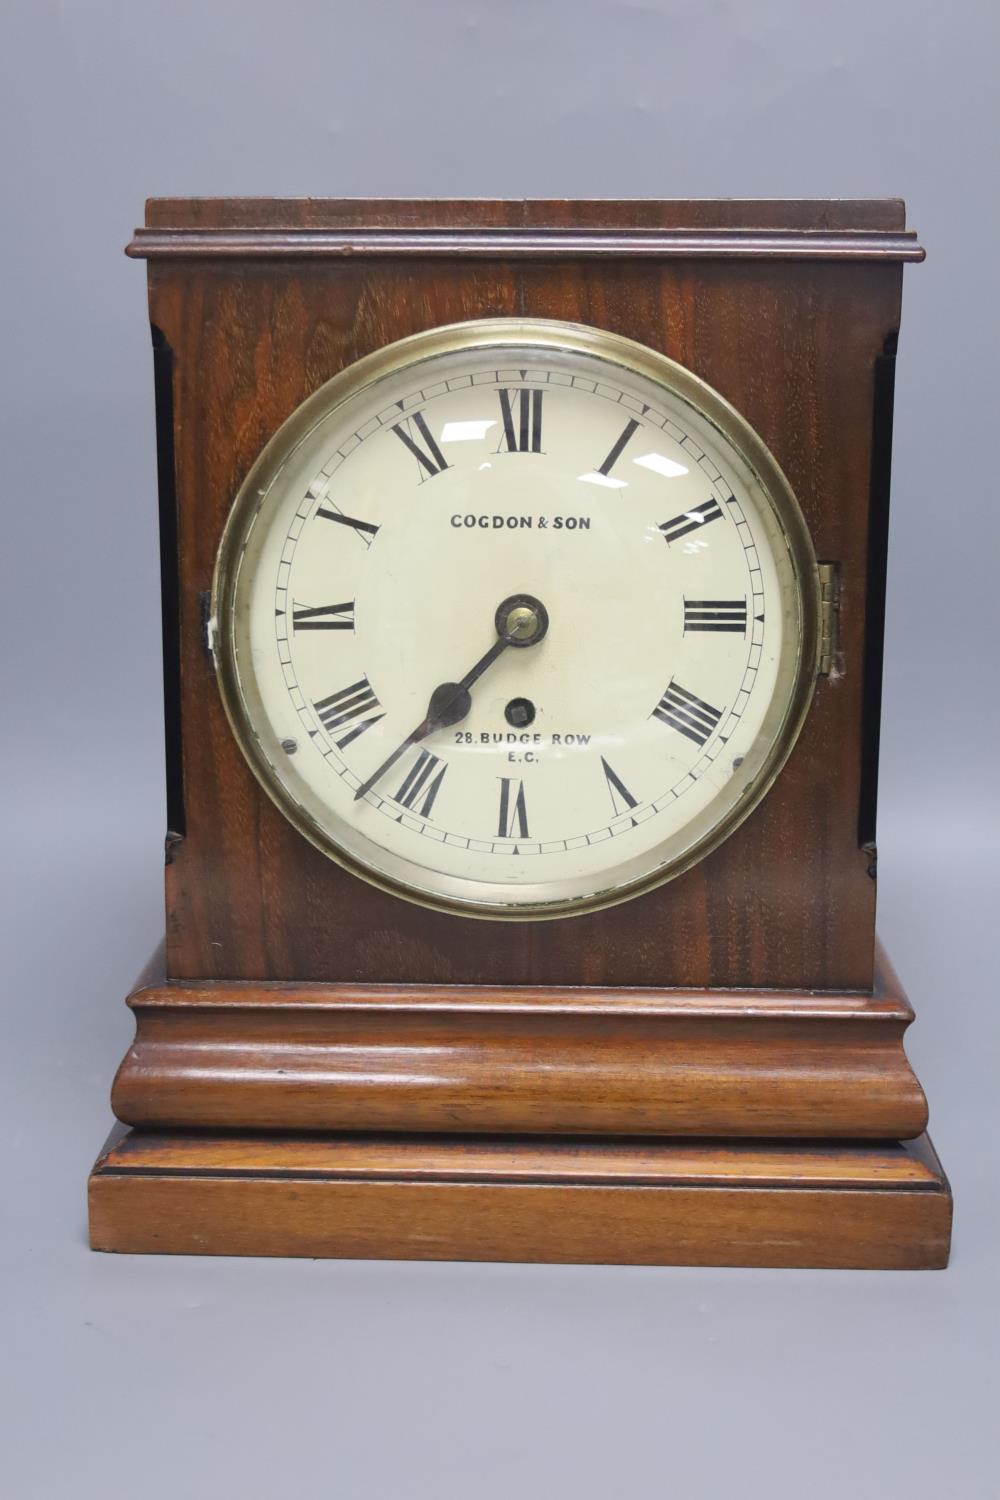 A 19th century Gonzalo Alves mantel timepiece, the 7" painted dial named Cogdon & Son, 28 Budge Row, - Image 2 of 3